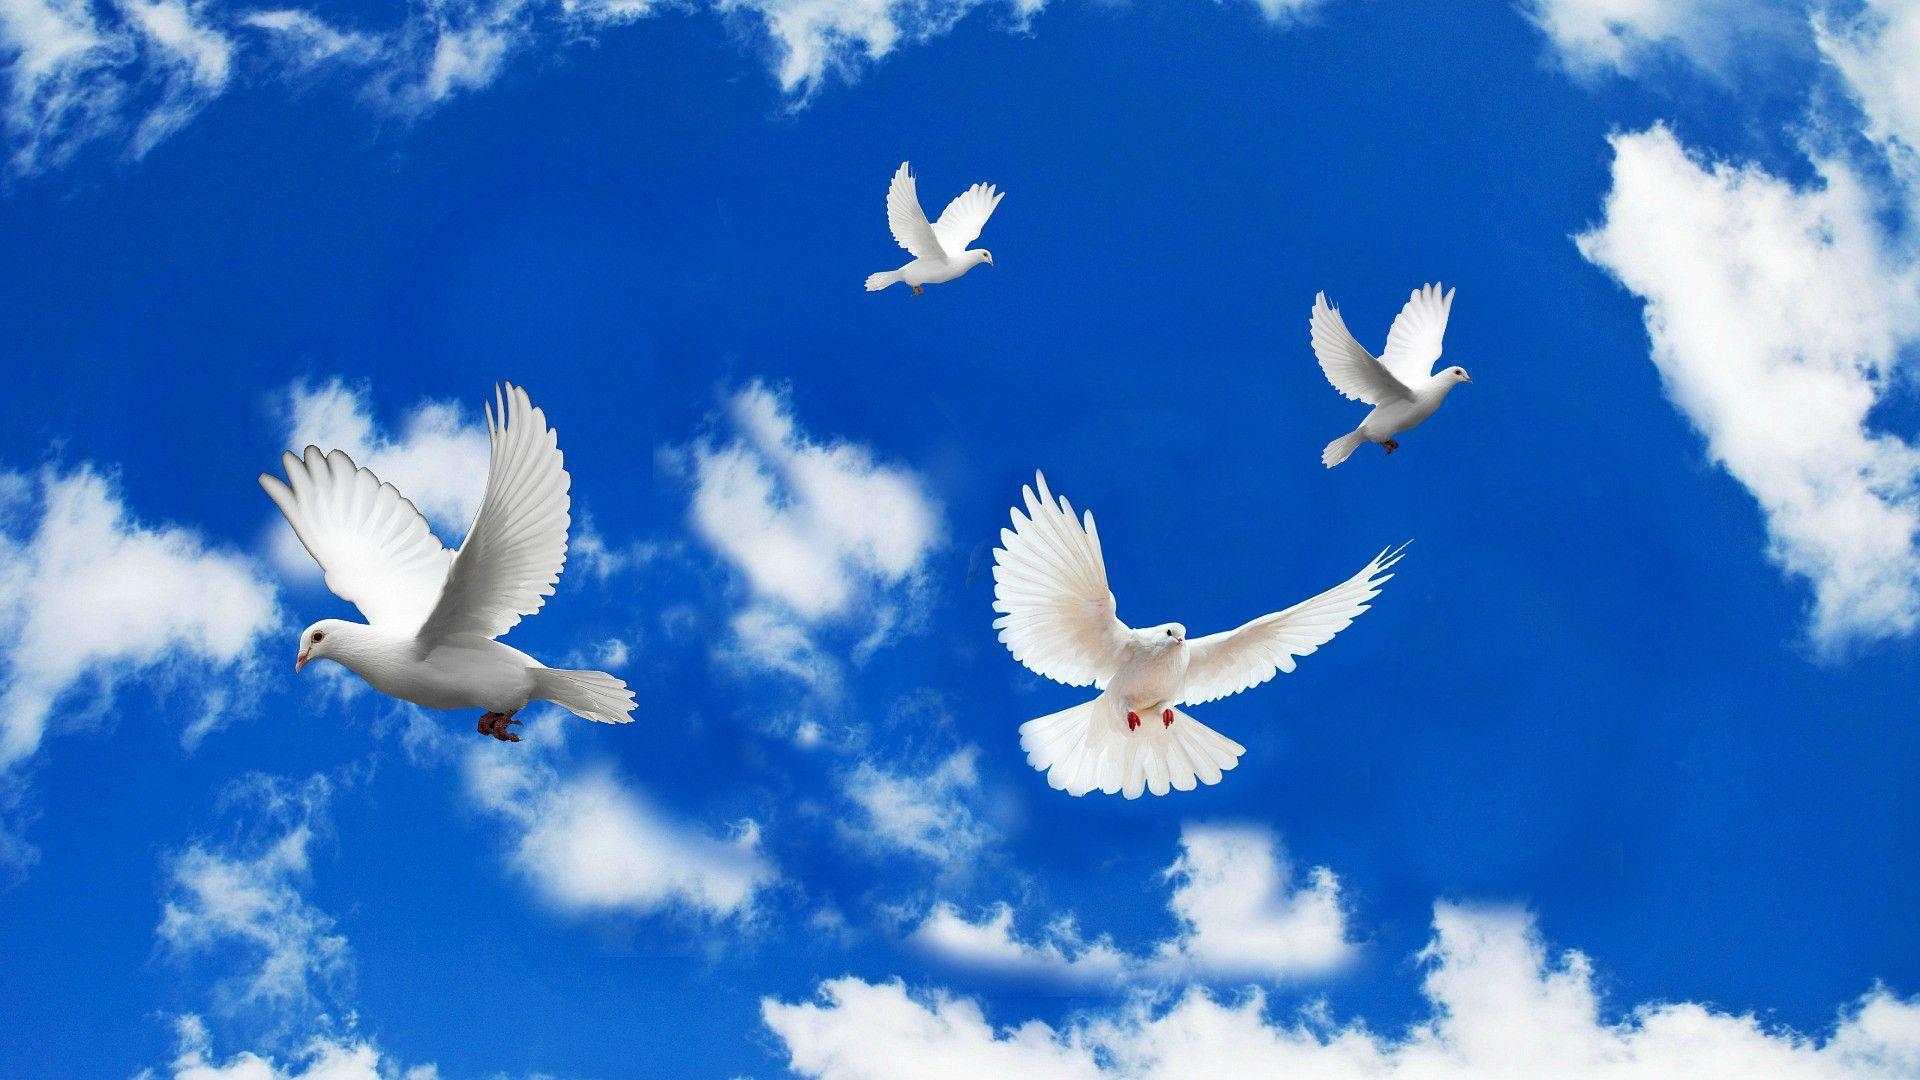 flying dove wallpaper Search Engine